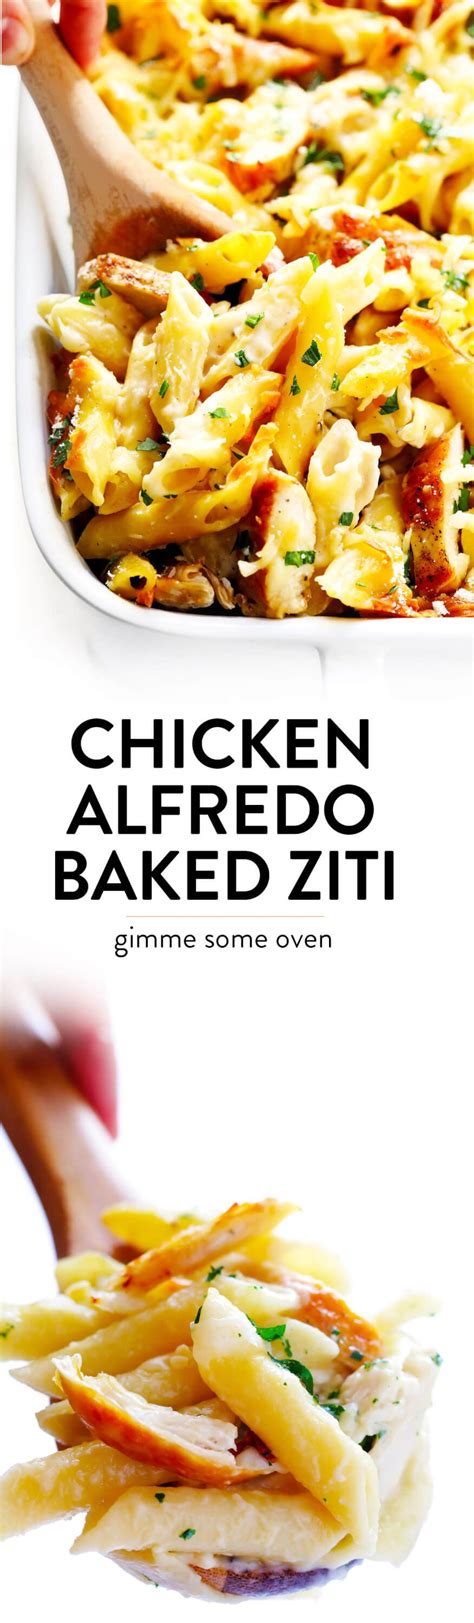 Love This Chicken Alfredo Baked Ziti Recipe Its Made With A Lightened